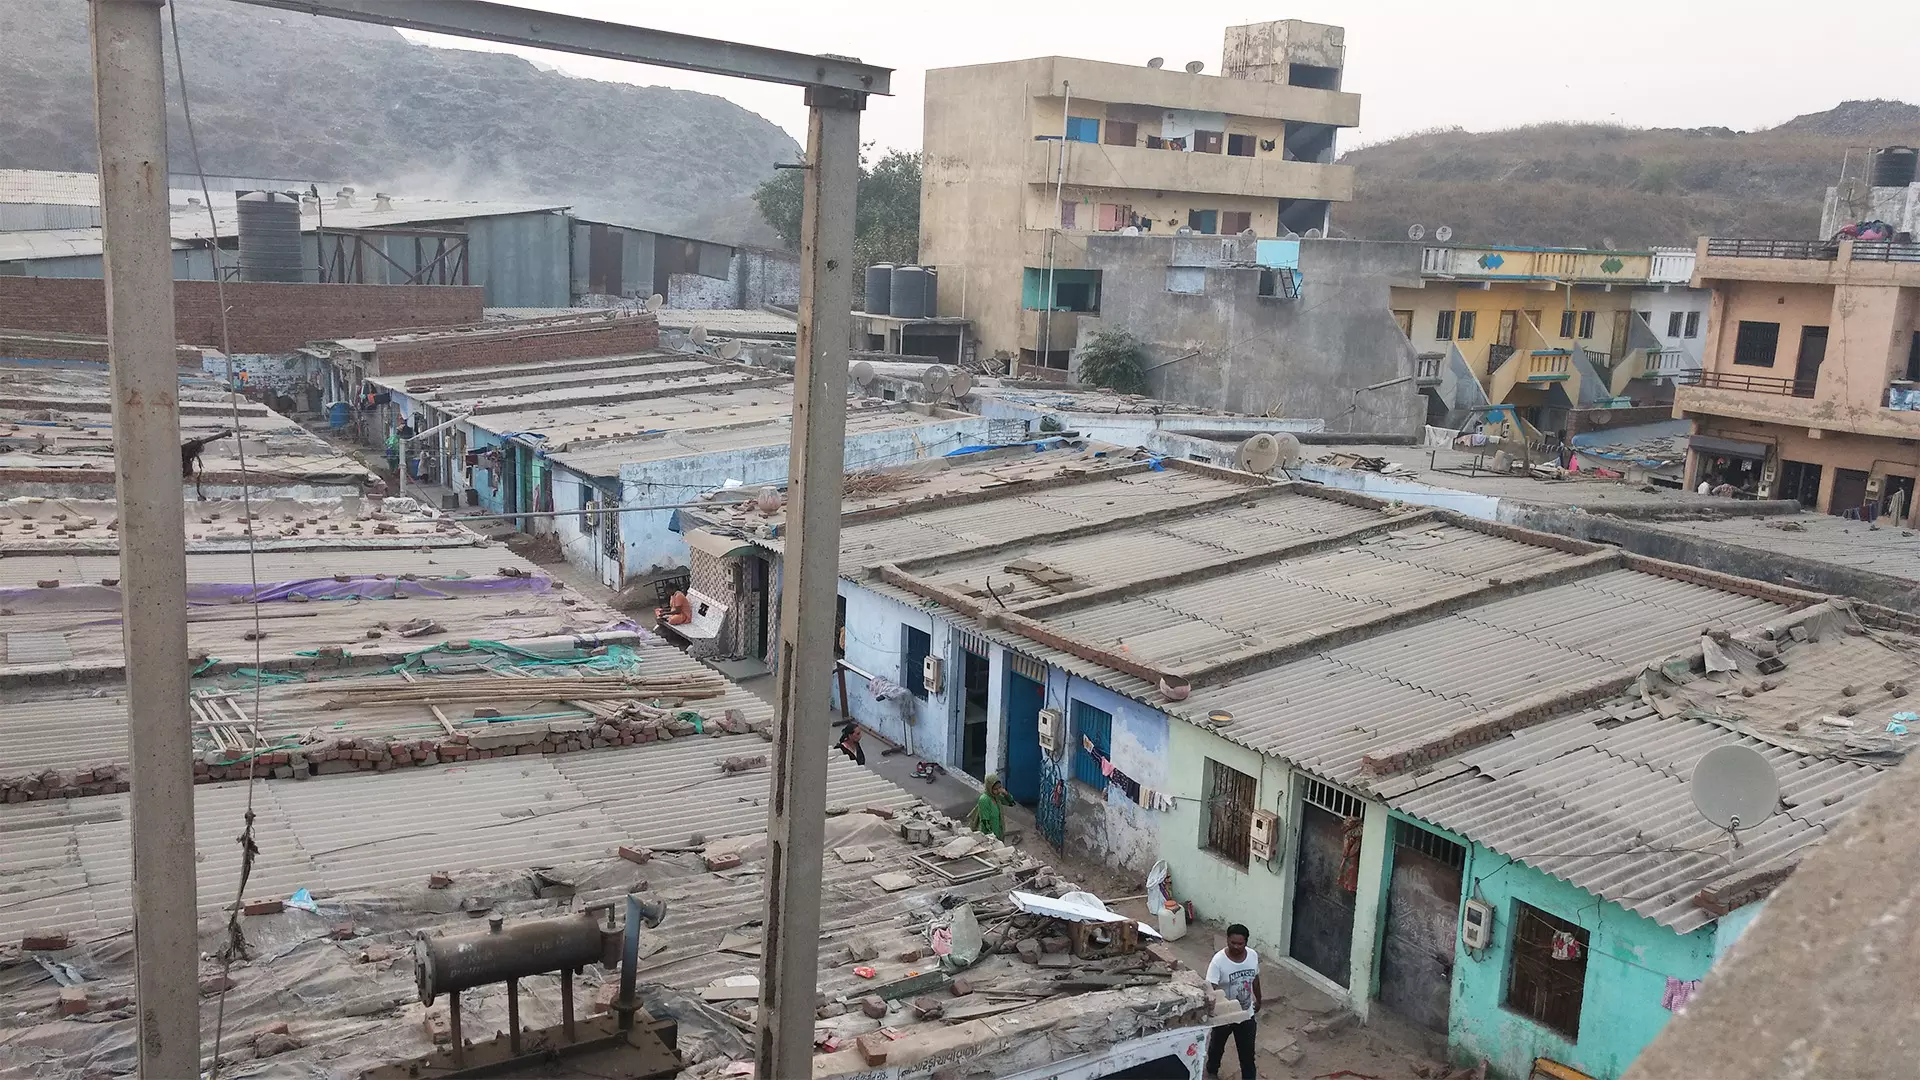 Citizen Nagar, a Muslim ghetto on the outskirts of Ahmedabad, started out as a temporary refugee colony for people displaced by the 2002 riots but ended up being a permanent abode for about 1,300 families.